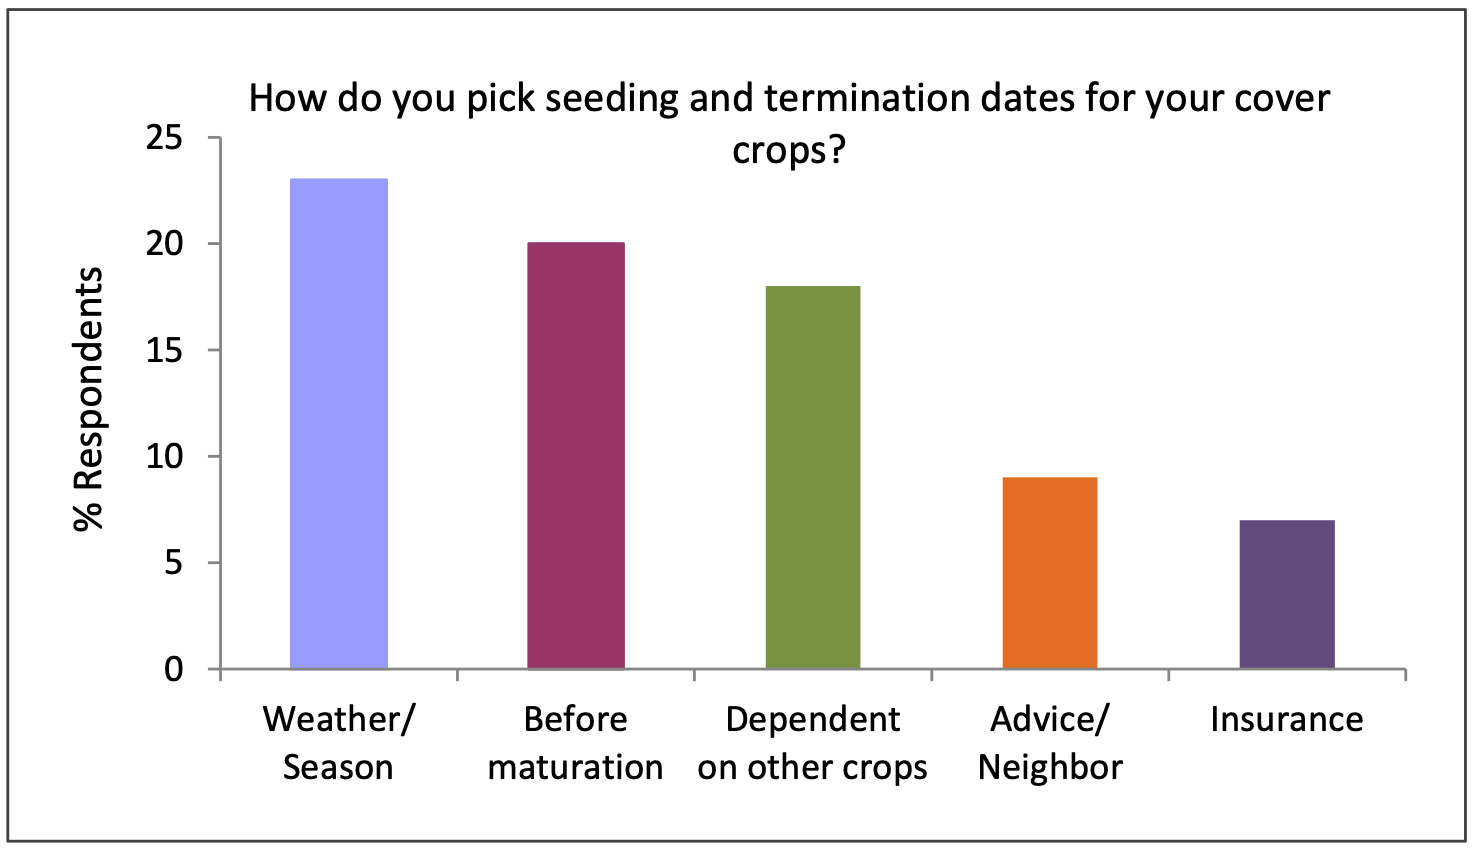 Cover crop growers used weather and crop stages most often when picking seeding and termination dates. N=44